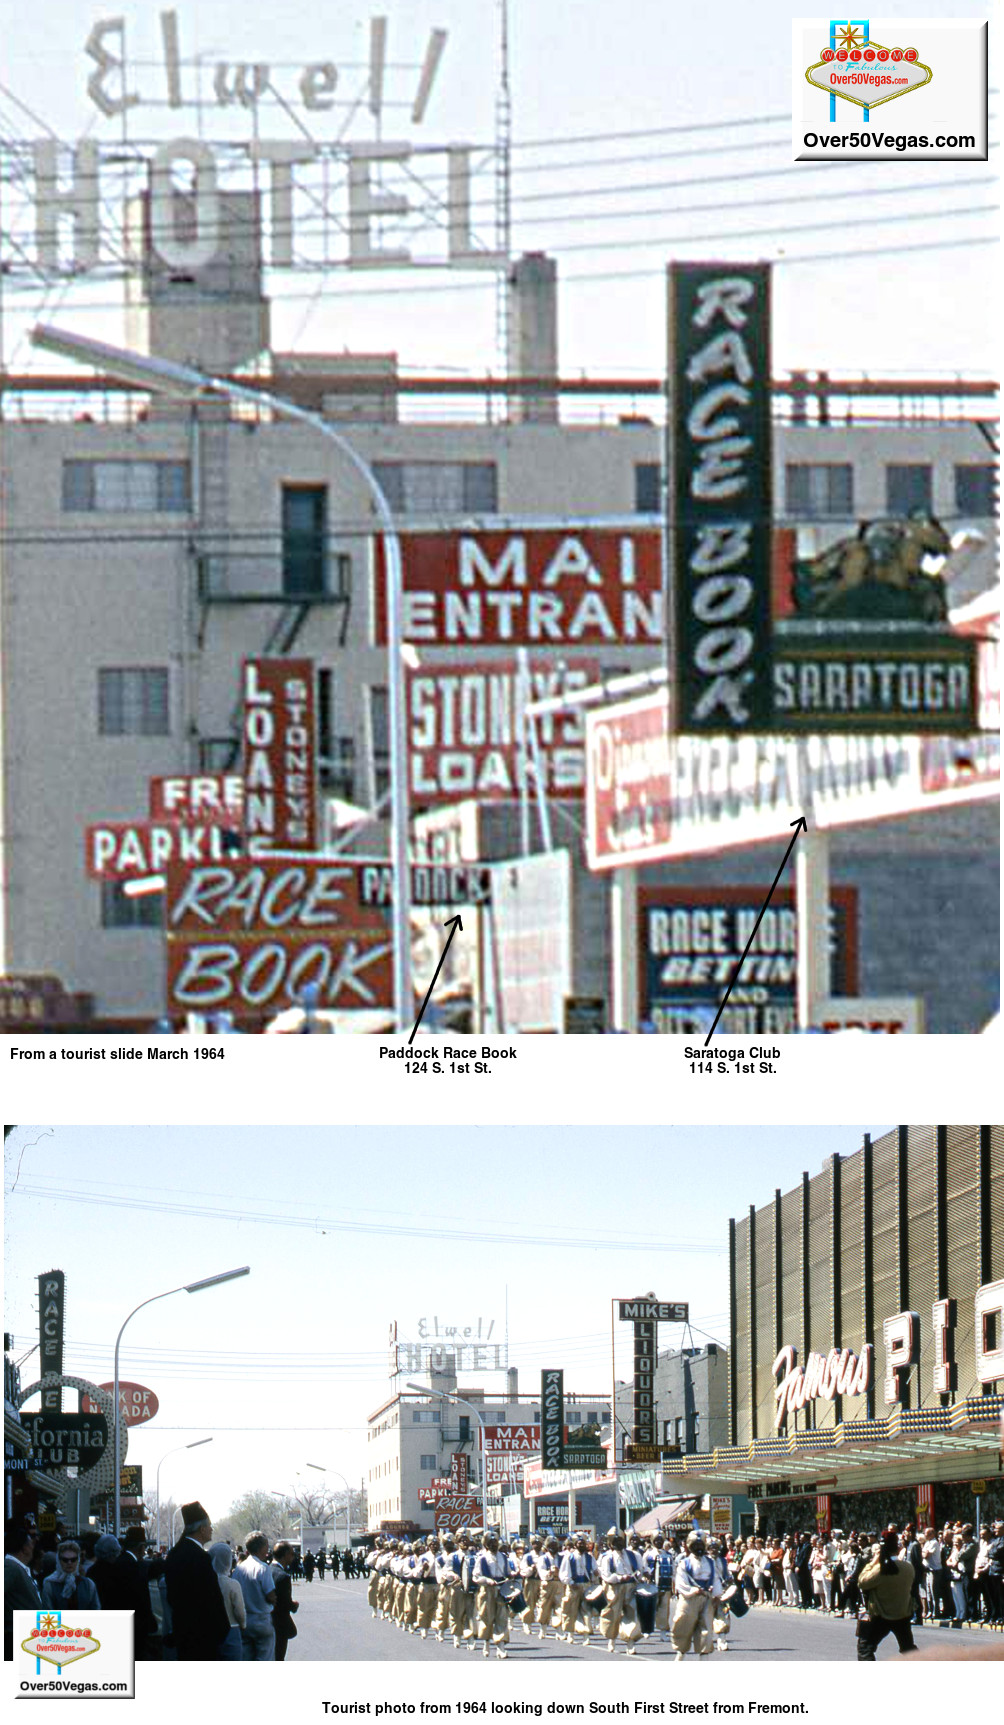 In this tourist photo from 1964 looking down South First Street from Fremont you can see the Hotel Elwell at 200 S. 1st, Mike’s Liquors,  Saratoga Club at 114 S. 1st St., the Paddock Race Book at 124 S. 1st, and the South First Street entrances for the California Club and the Famous Pioneer Club.  